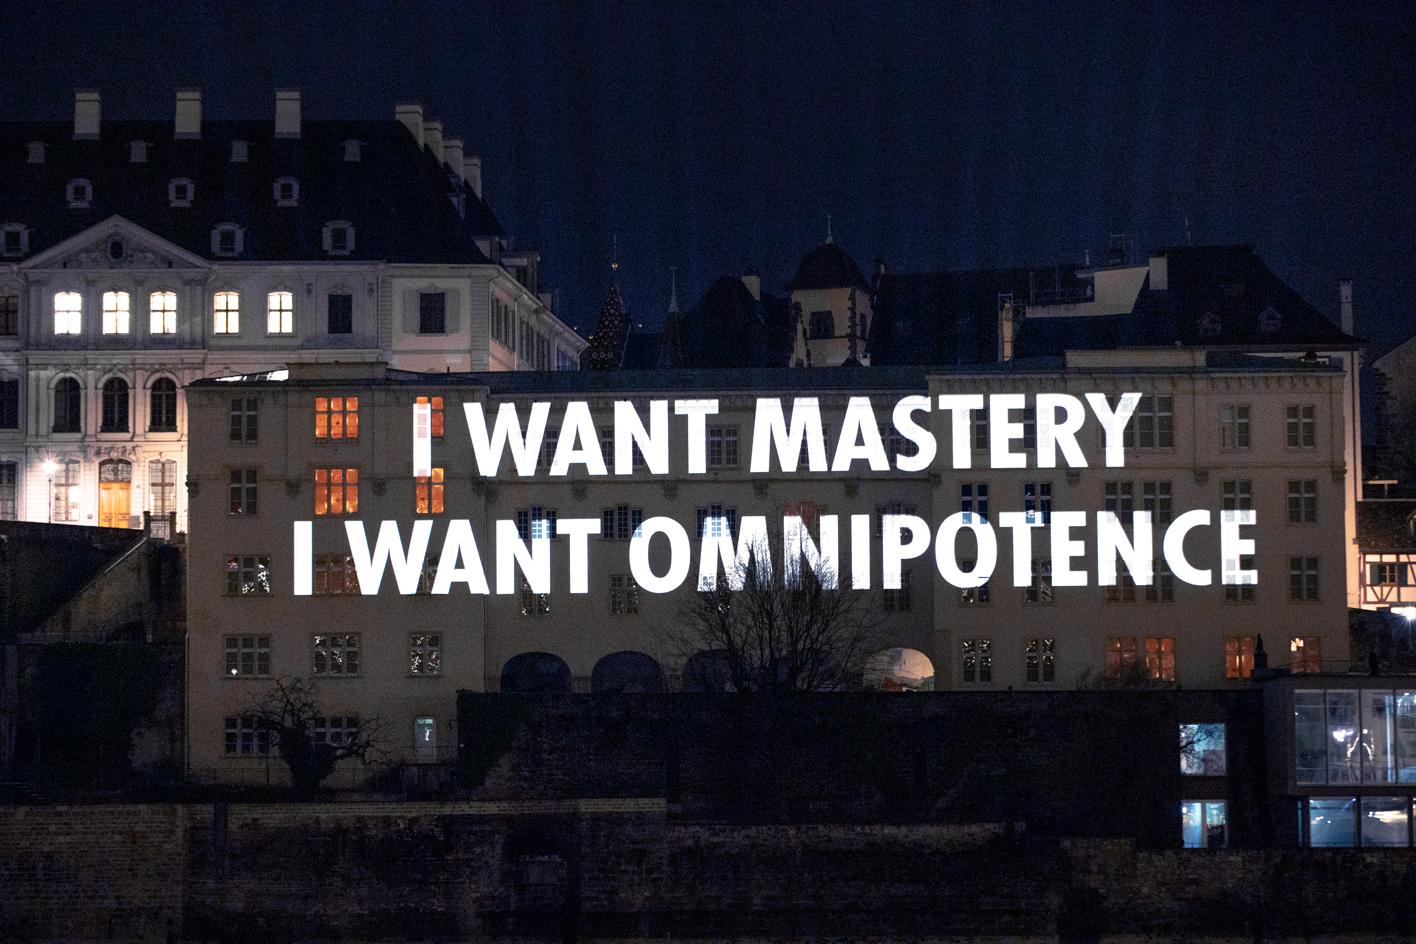 Louise Bourgeois x Jenny Holzer projections, Alte Universität, Basel, 2022. Excerpts from Louise Bourgeois’ personal writings, used with permission of the Louise Bourgeois Archive. © The Eastern Foundation/ Licensed by ProLitteris and VAGA at Artists Rights Society (ARS), NY